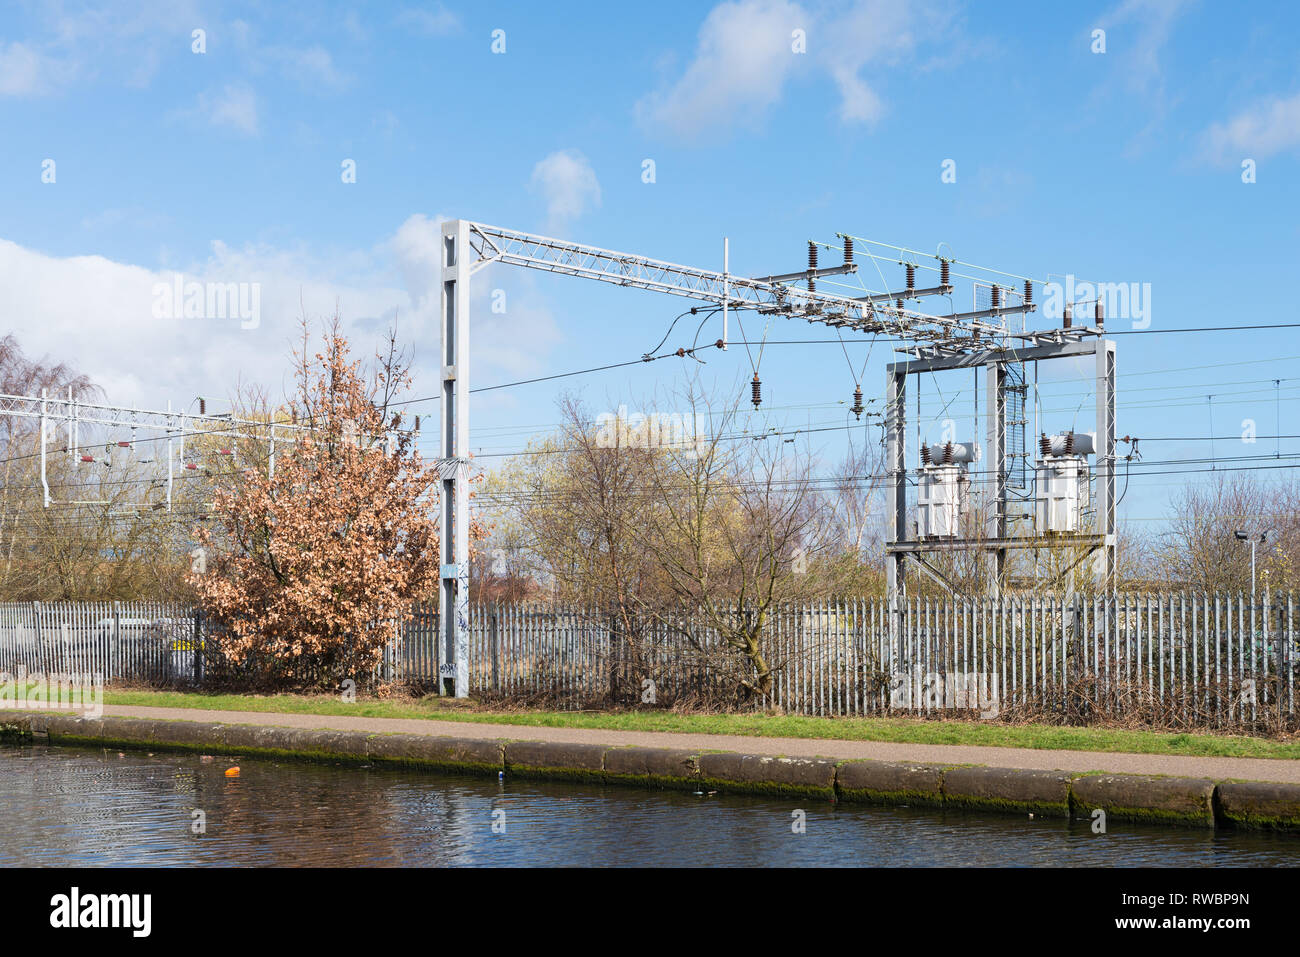 Over head power lines or cables on a railway track next to Birmingham Canal Old Line in Ladywood, Birmingham Stock Photo